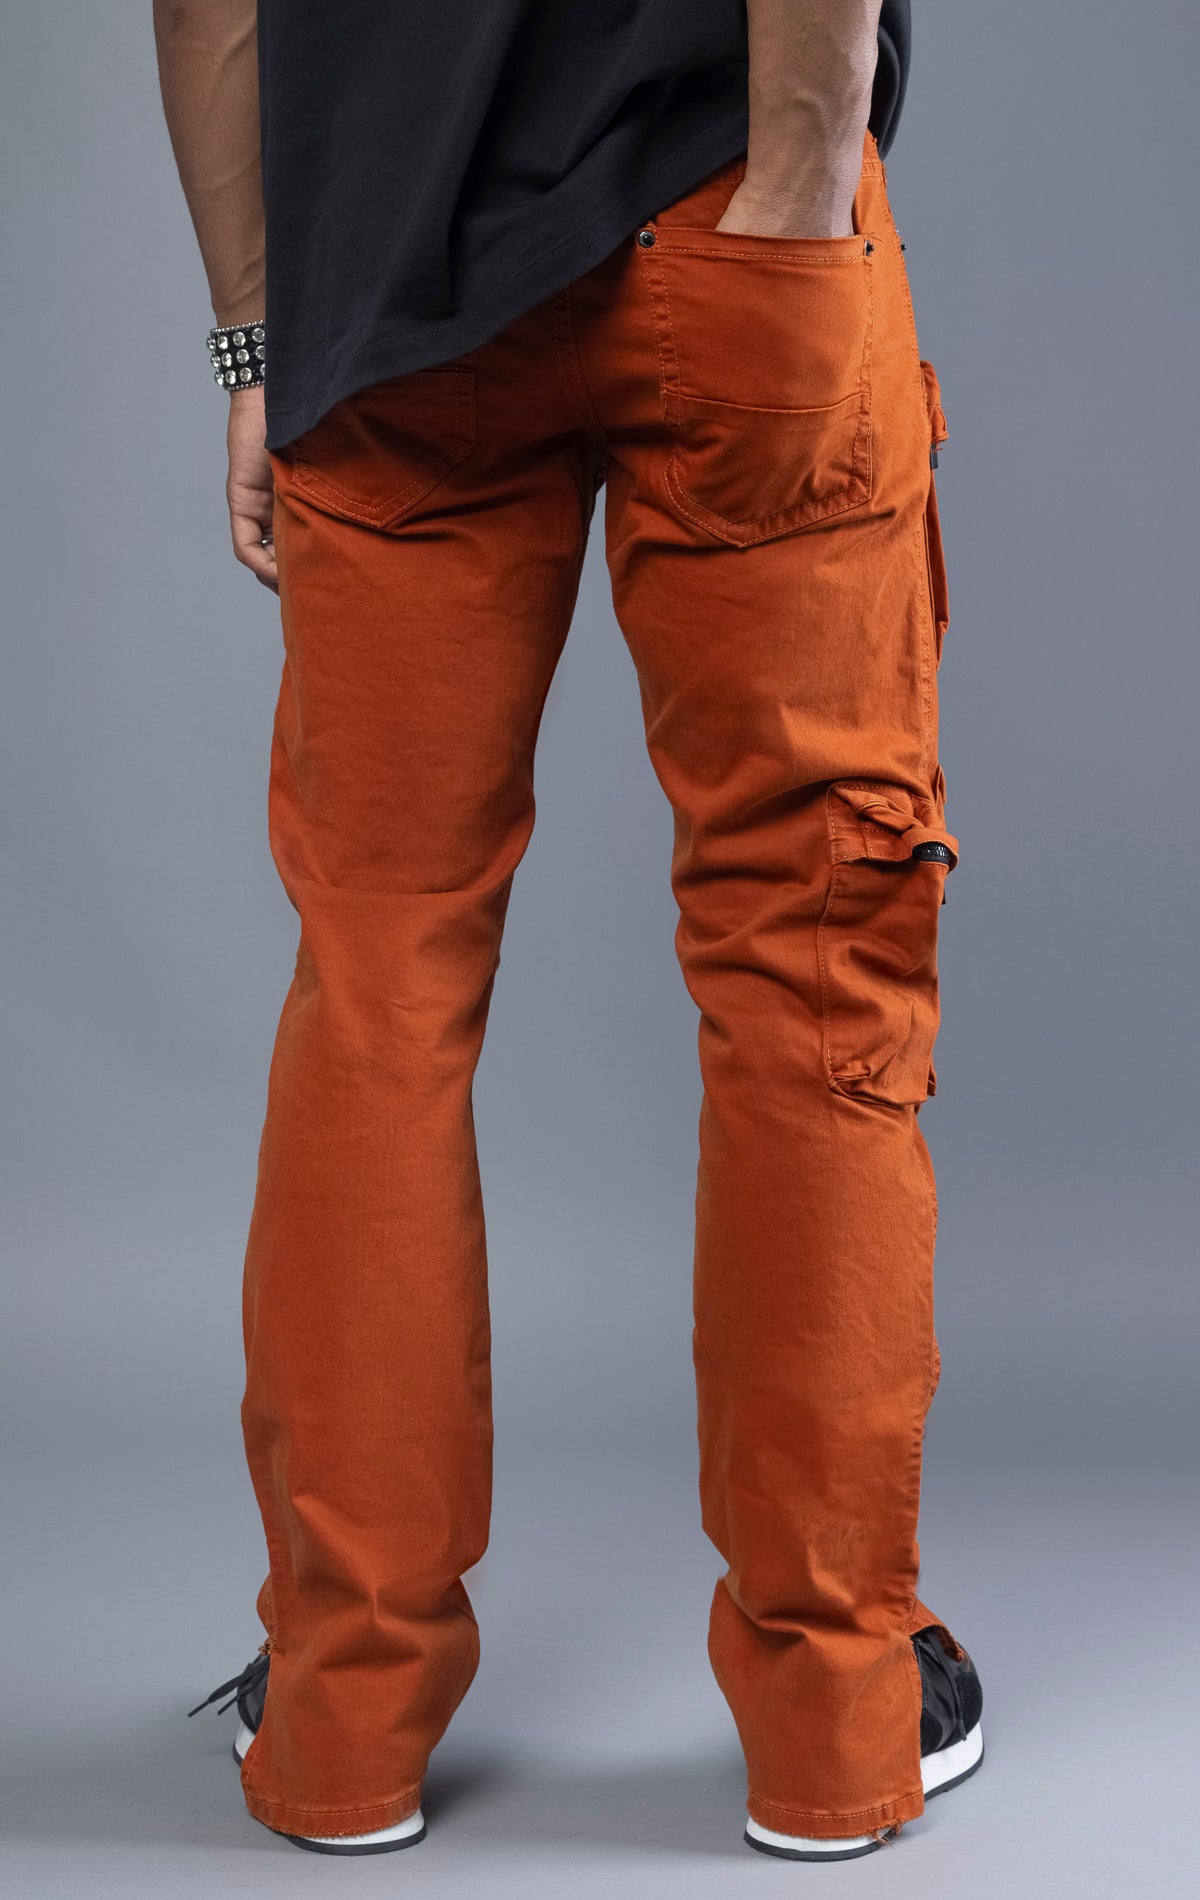 Men's cargo pants with multiple pockets for function. Regular, tapered fit with a comfortable rise. Available in orange and olive colors.